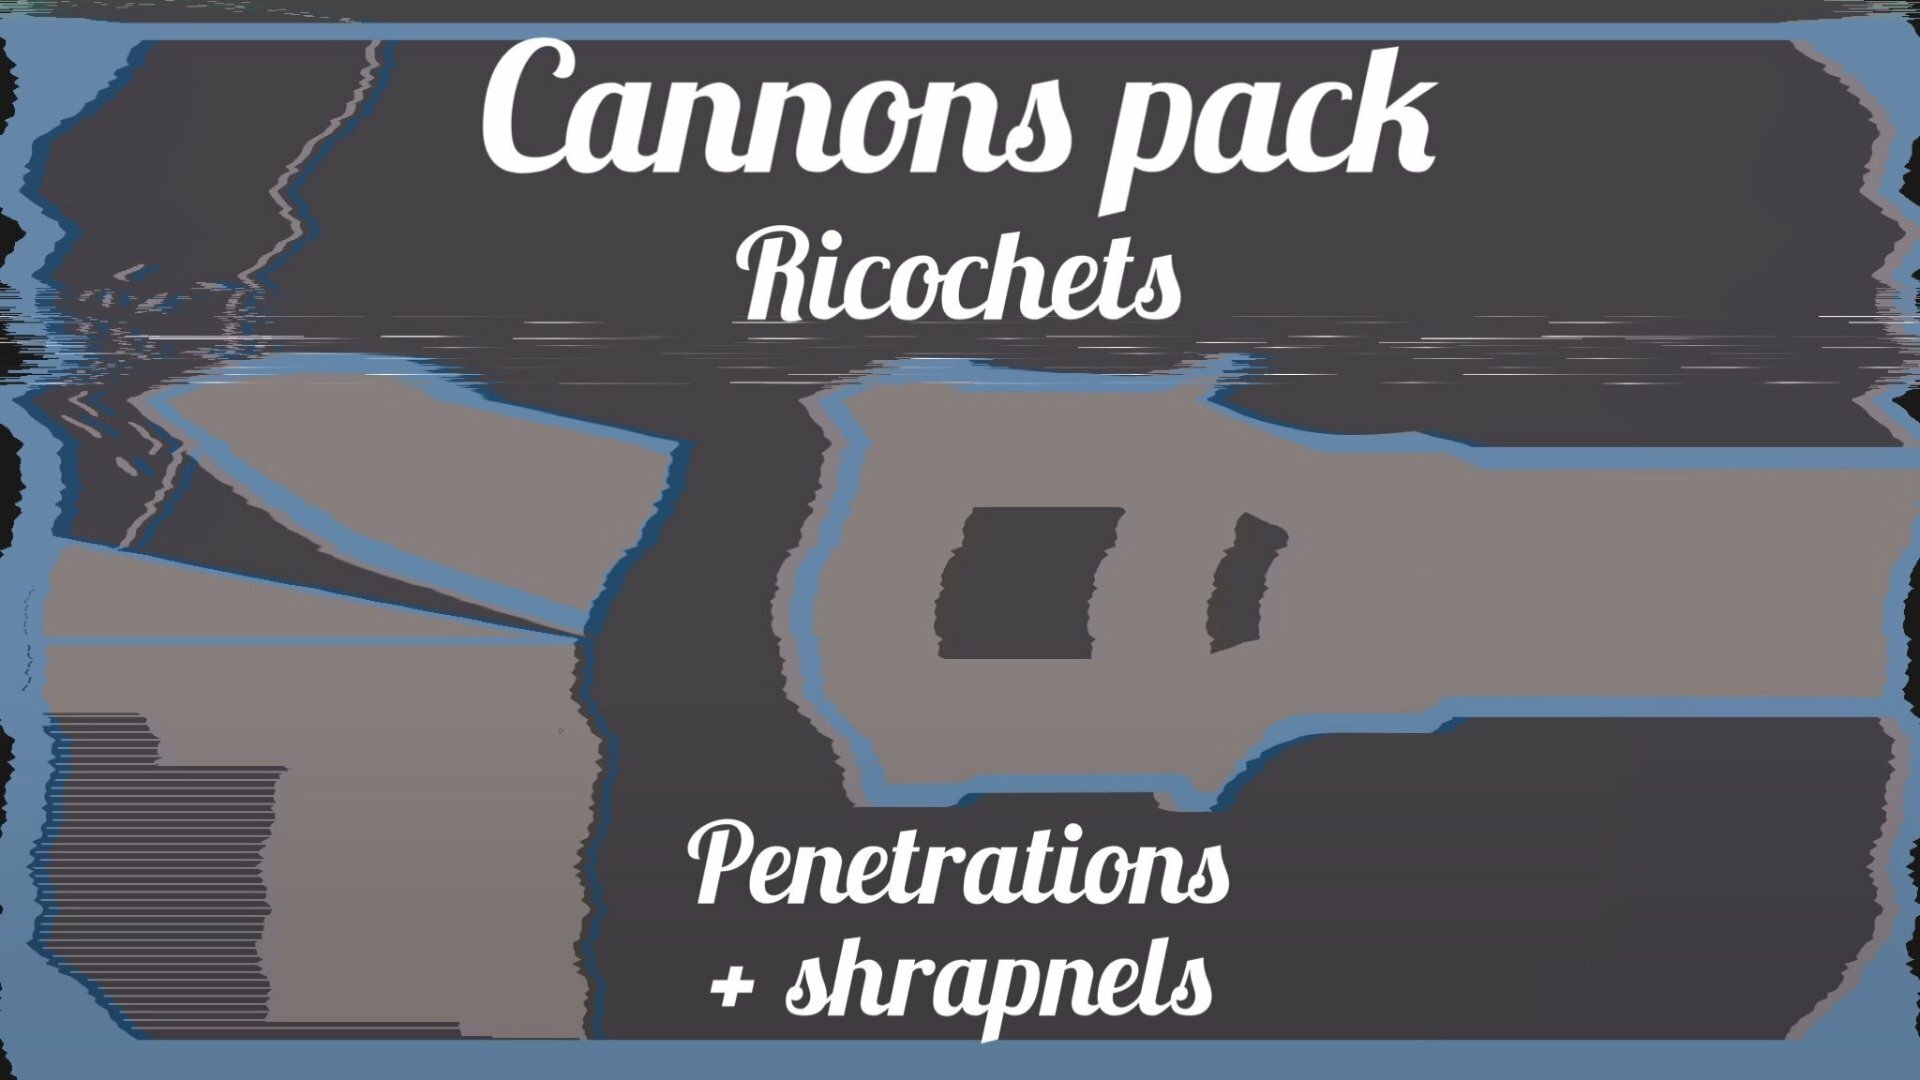 Cannons Pack Ricochets and Penetrations